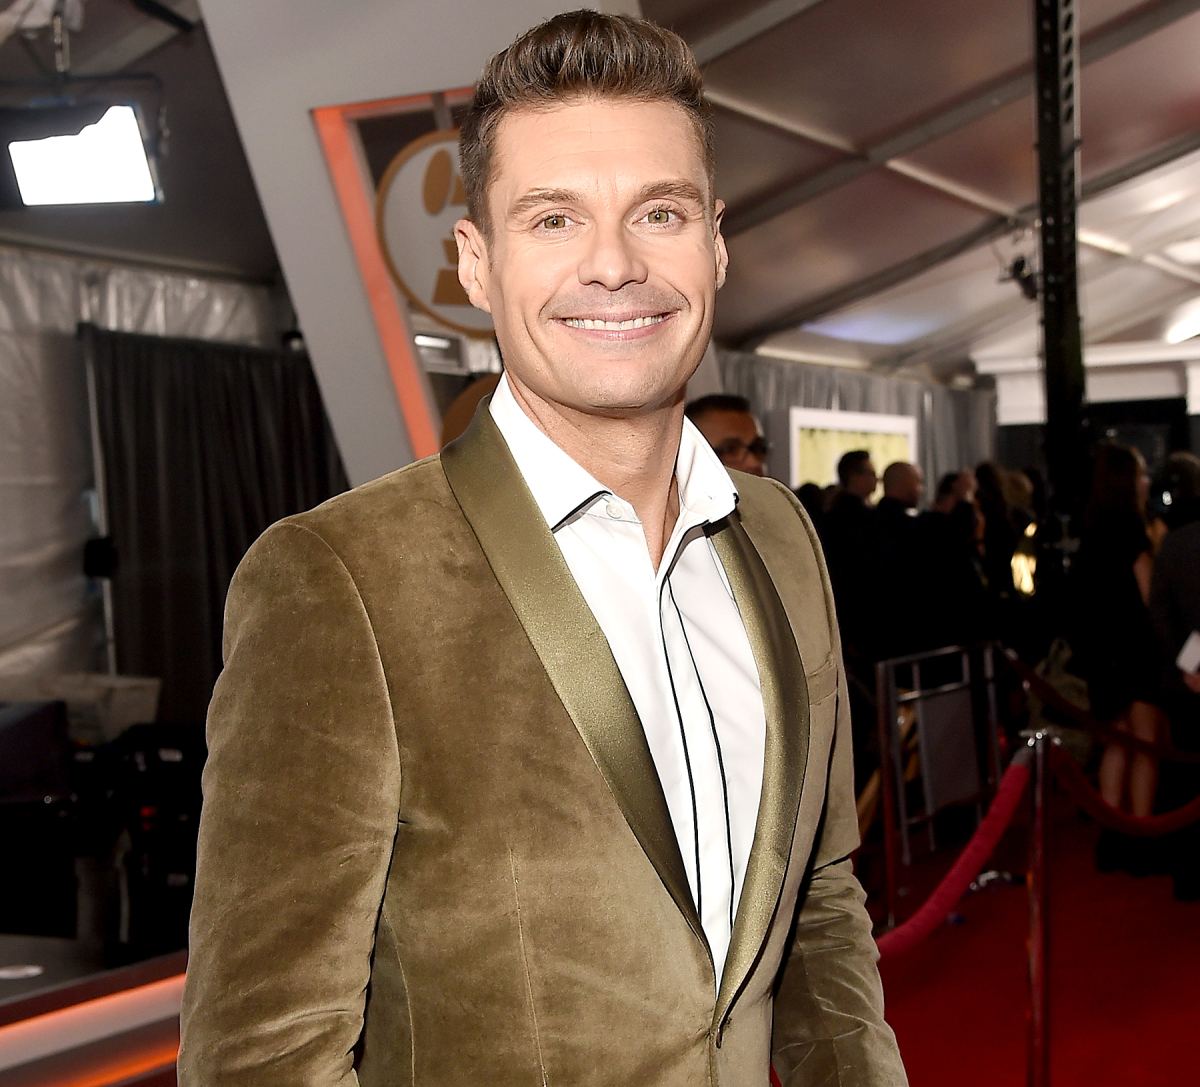 On Air With Ryan Seacrest  Celebrity engagement rings, Celebrity